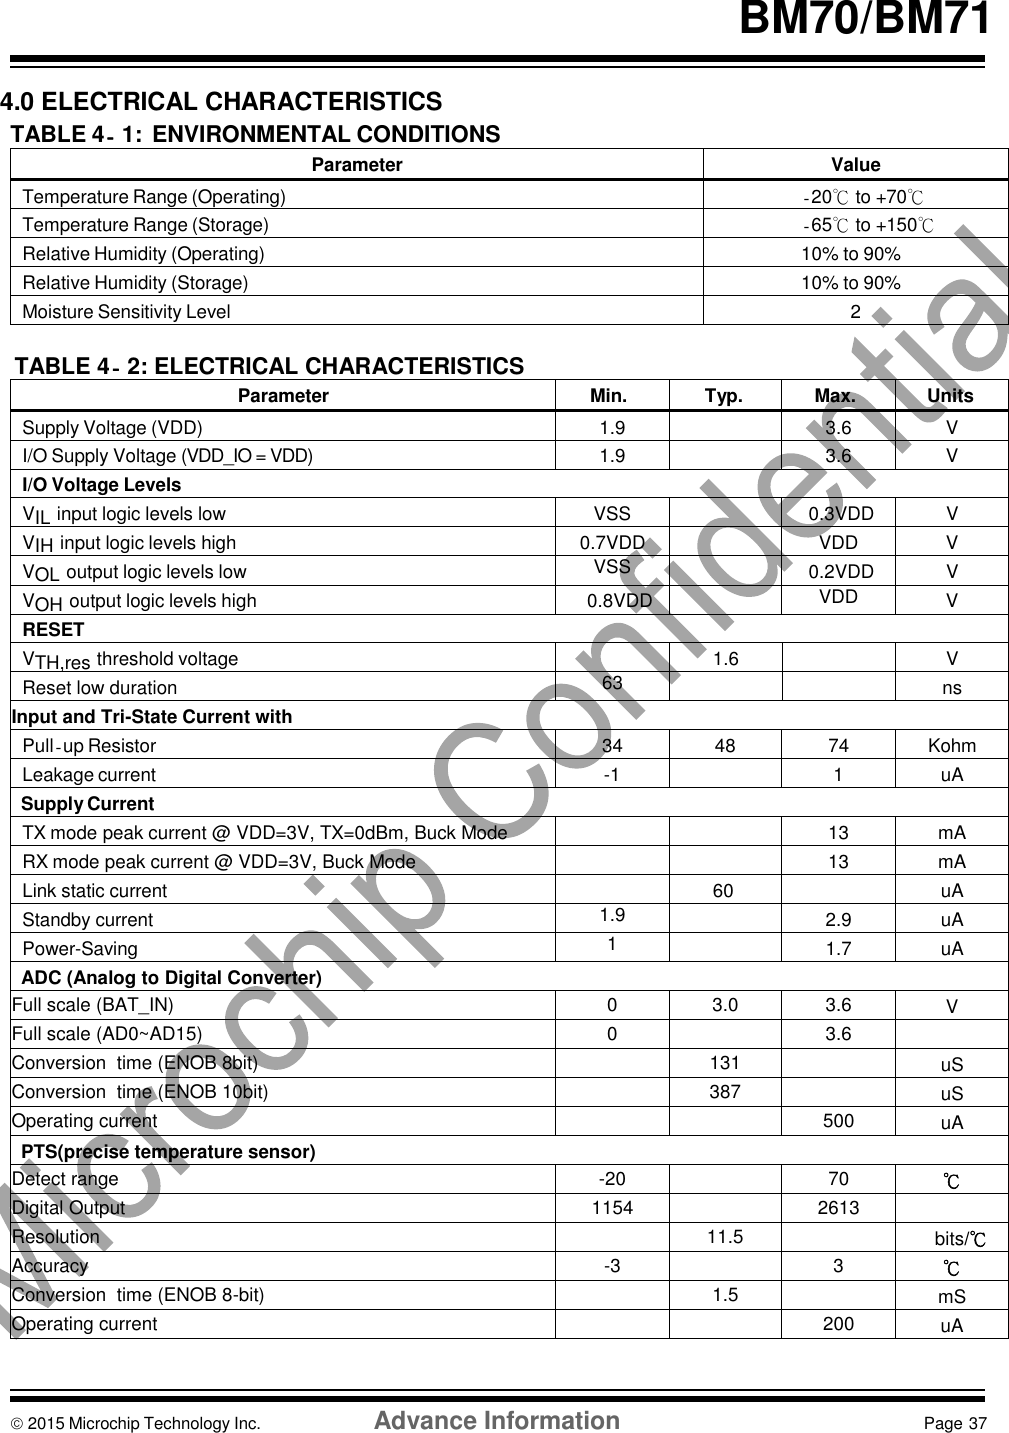    BM70/BM71  4.0 ELECTRICAL CHARACTERISTICS TABLE 4‐1: ENVIRONMENTAL CONDITIONS Parameter Value Temperature Range (Operating) -20℃ to +70℃ Temperature Range (Storage) -65℃ to +150℃ Relative Humidity (Operating) 10% to 90% Relative Humidity (Storage) 10% to 90% Moisture Sensitivity Level 2  TABLE 4‐2: ELECTRICAL CHARACTERISTICS Parameter Min. Typ. Max. Units Supply Voltage (VDD) 1.9  3.6 V I/O Supply Voltage (VDD_IO = VDD) 1.9  3.6 V I/O Voltage Levels  ) VIL input logic levels low VSS  0.3VDD V VIH input logic levels high 0.7VDD  VDD V VOL output logic levels low VSS  0.2VDD V VOH output logic levels high 0.8VDD  VDD V RESET VTH,res threshold voltage  1.6  V Reset low duration 63   ns Input and Tri-State Current with Pull-up Resistor 34 48 74 Kohm Leakage current -1  1 uA Supply Current TX mode peak current @ VDD=3V, TX=0dBm, Buck Mode   13 mA RX mode peak current @ VDD=3V, Buck Mode   13 mA Link static current  60  uA Standby current 1.9  2.9 uA Power-Saving 1  1.7 uA ADC (Analog to Digital Converter) Full scale (BAT_IN) 0 3.0 3.6 V Full scale (AD0~AD15) 0  3.6  Conversion  time (ENOB 8bit)  131  uS Conversion  time (ENOB 10bit)  387  uS Operating current   500 uA PTS(precise temperature sensor) Detect range -20  70 ℃ Digital Output 1154  2613  Resolution  11.5   bits/℃ Accuracy -3  3 ℃ Conversion  time (ENOB 8-bit)  1.5  mS Operating current   200 uA   2015 Microchip Technology Inc.  Advance Information  Page 37   